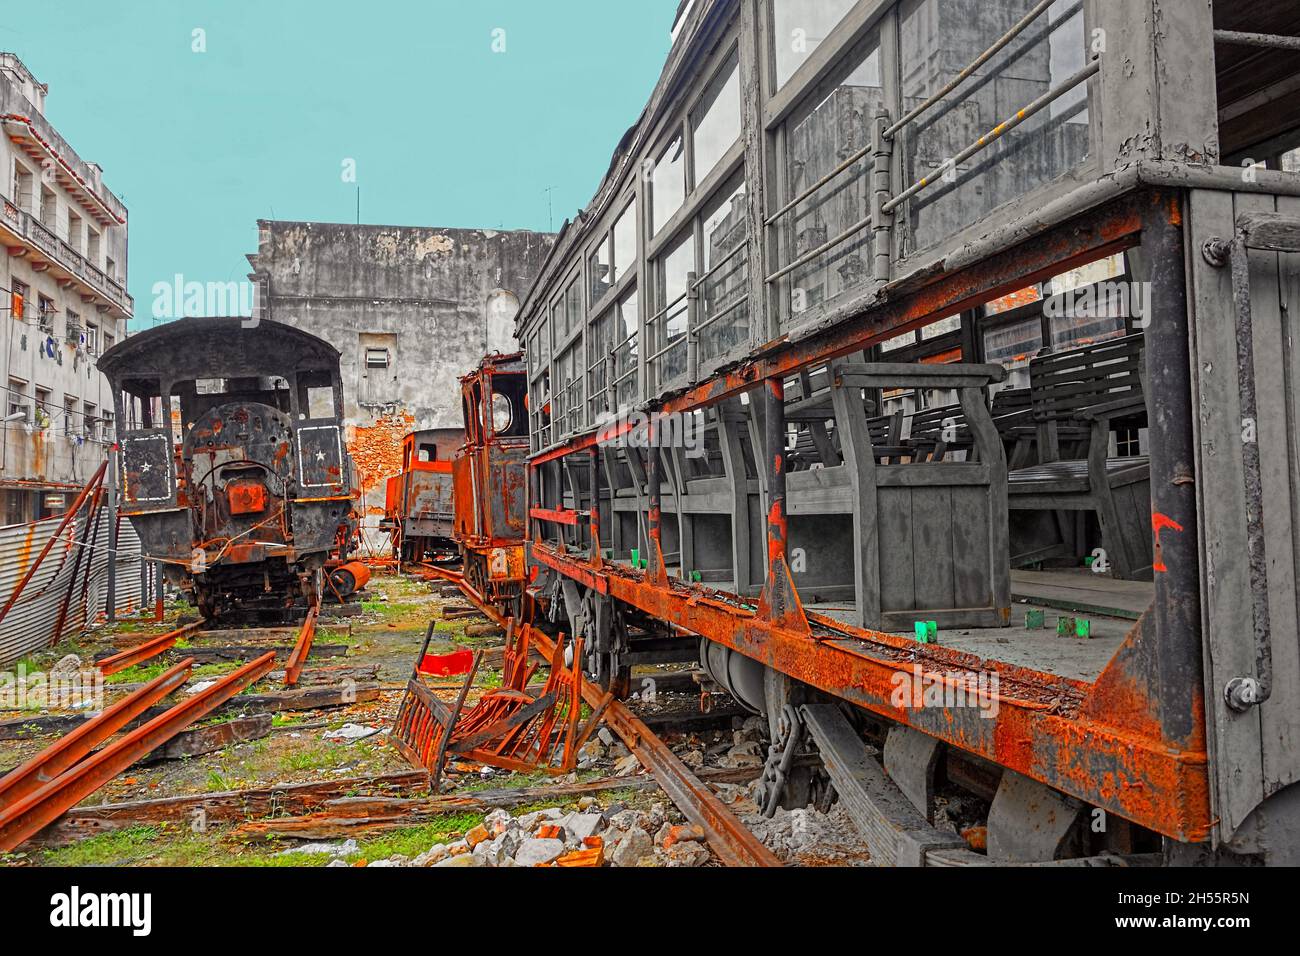 Rusty and old steam locomotives and freight cars abandoned in a yard in central Havana, Cuba. Stock Photo